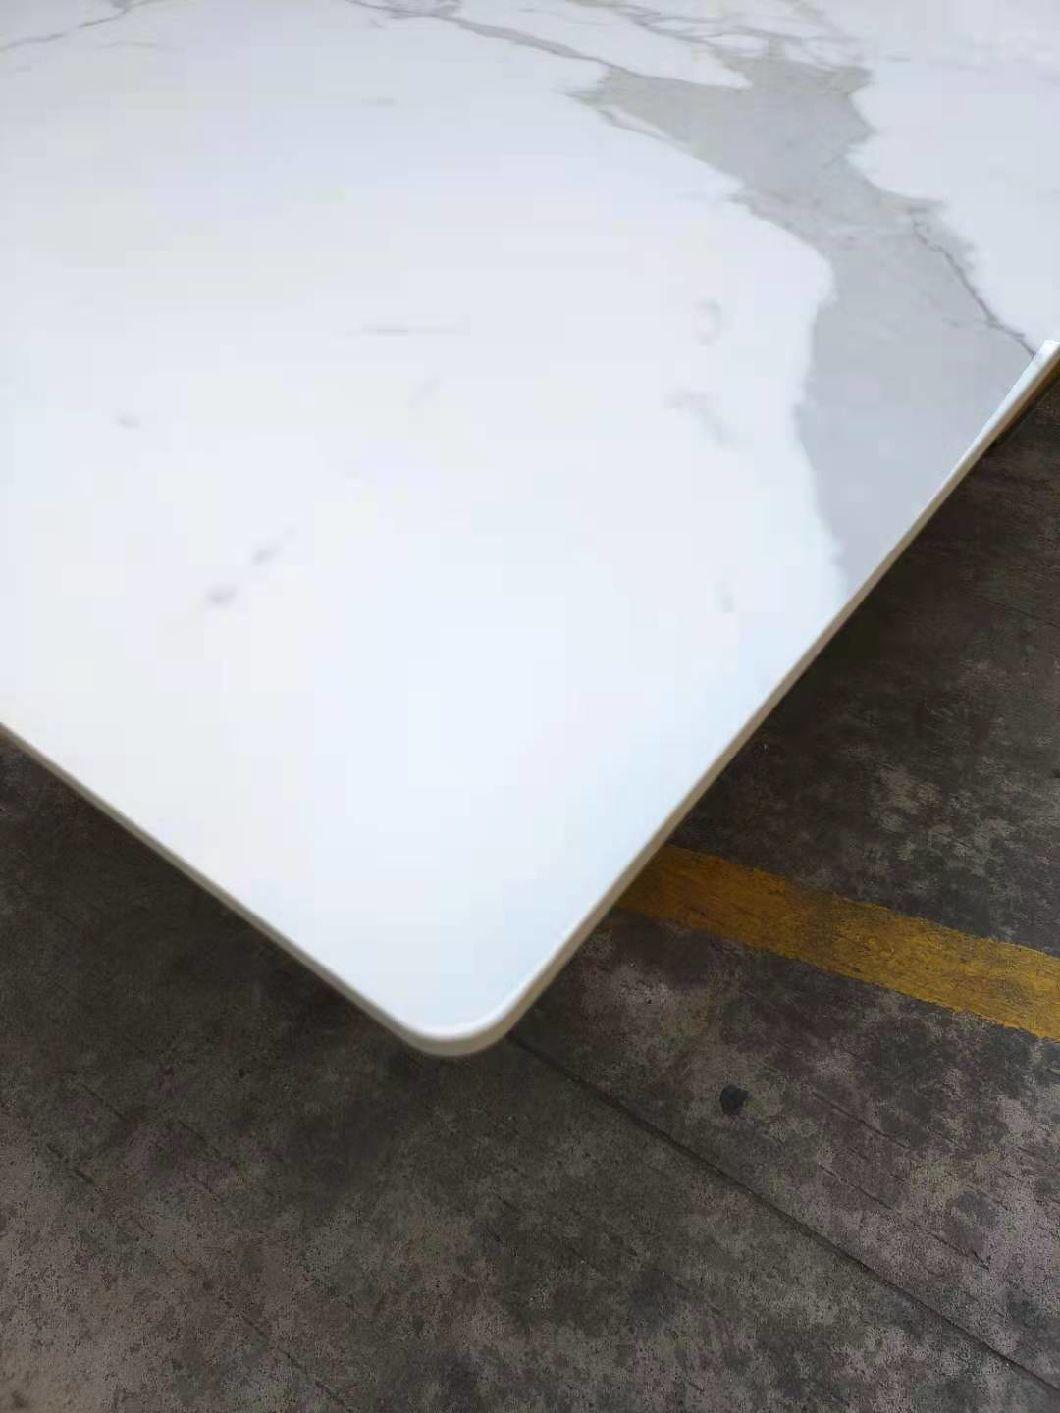 Gold Dining Table with Marble or Sintered Stone Top